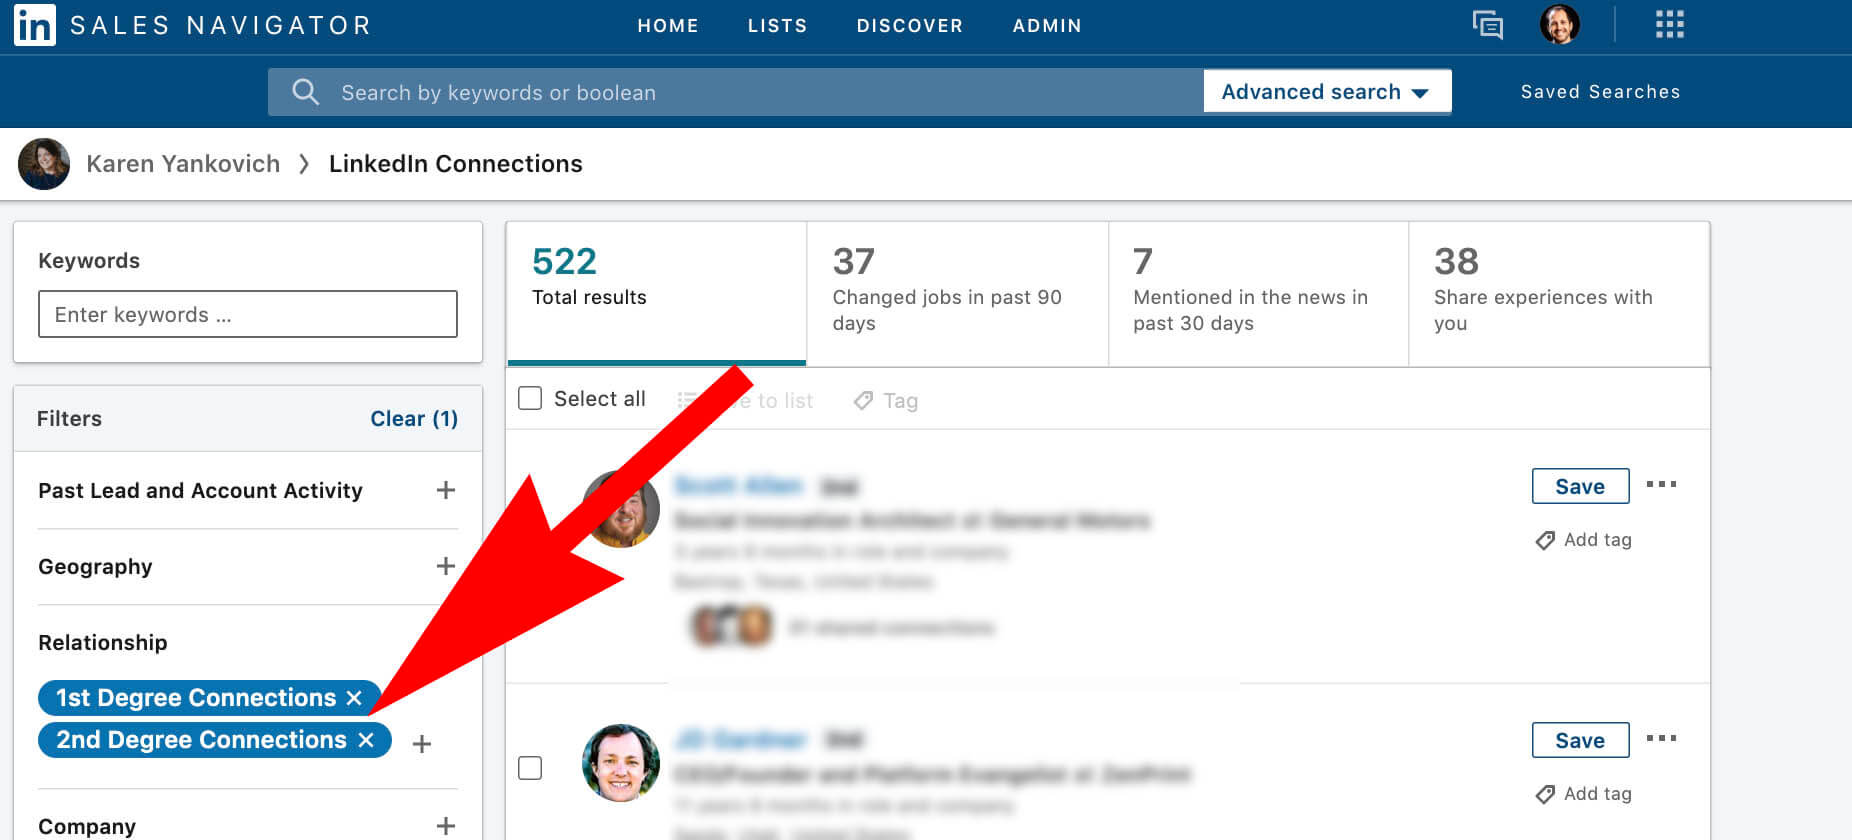 On Linkedin Sales Navigator view 1st and 2nd degree connections 